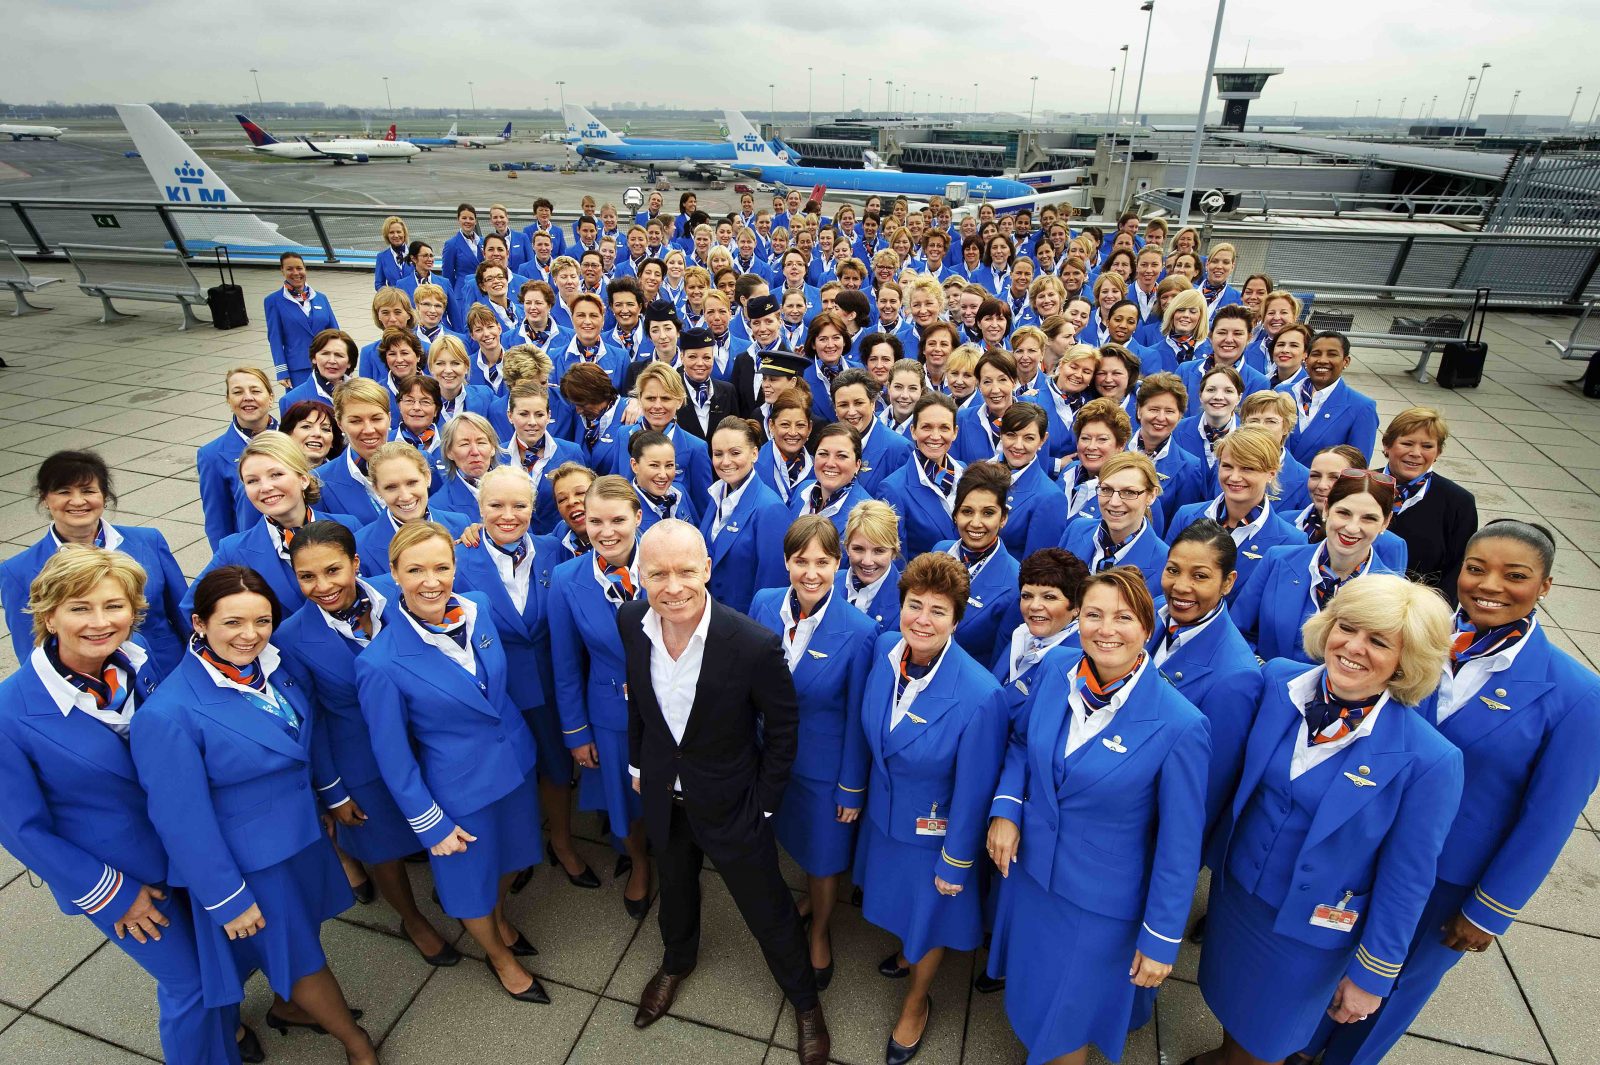 KLM Agreed a Deal with Cabin Crew Principle - There's Some Details Behind This